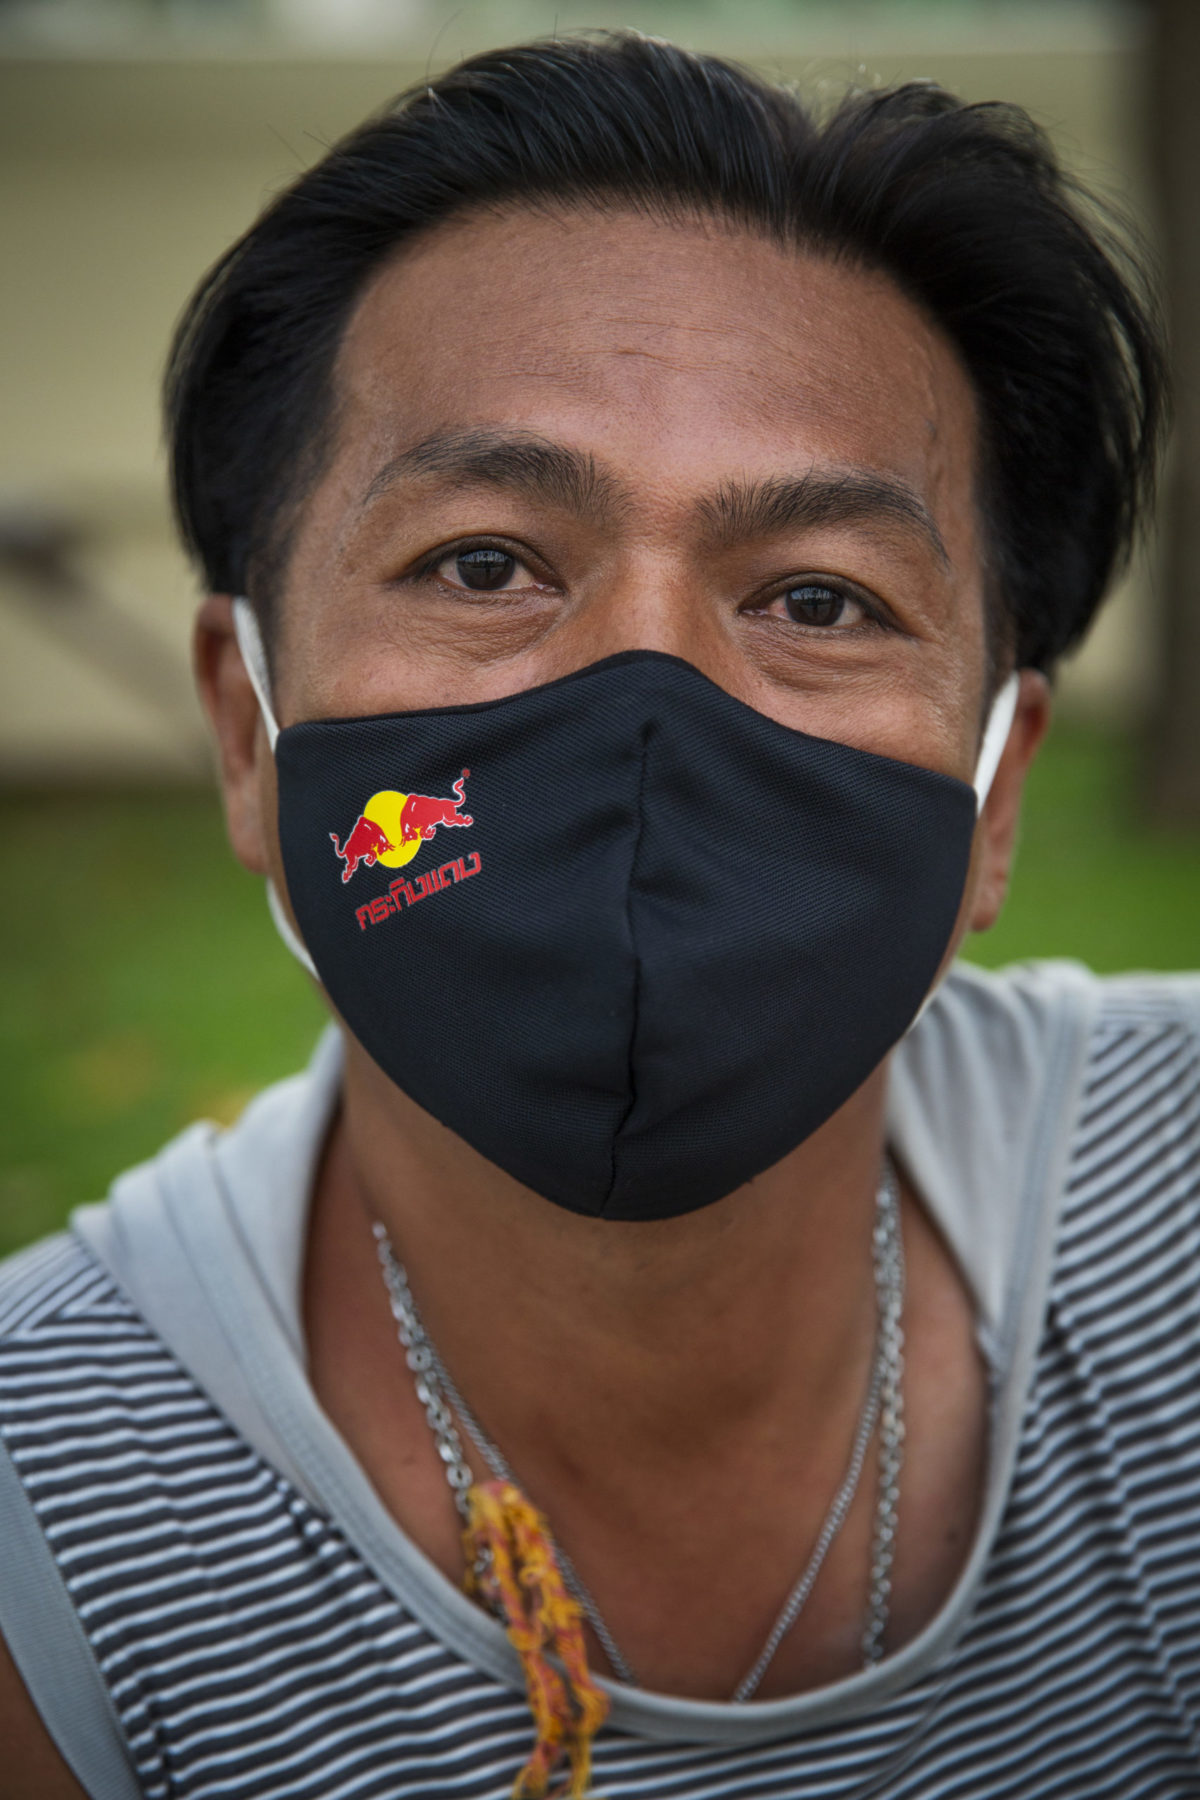 A person wearing a mask leans forward for their photo.